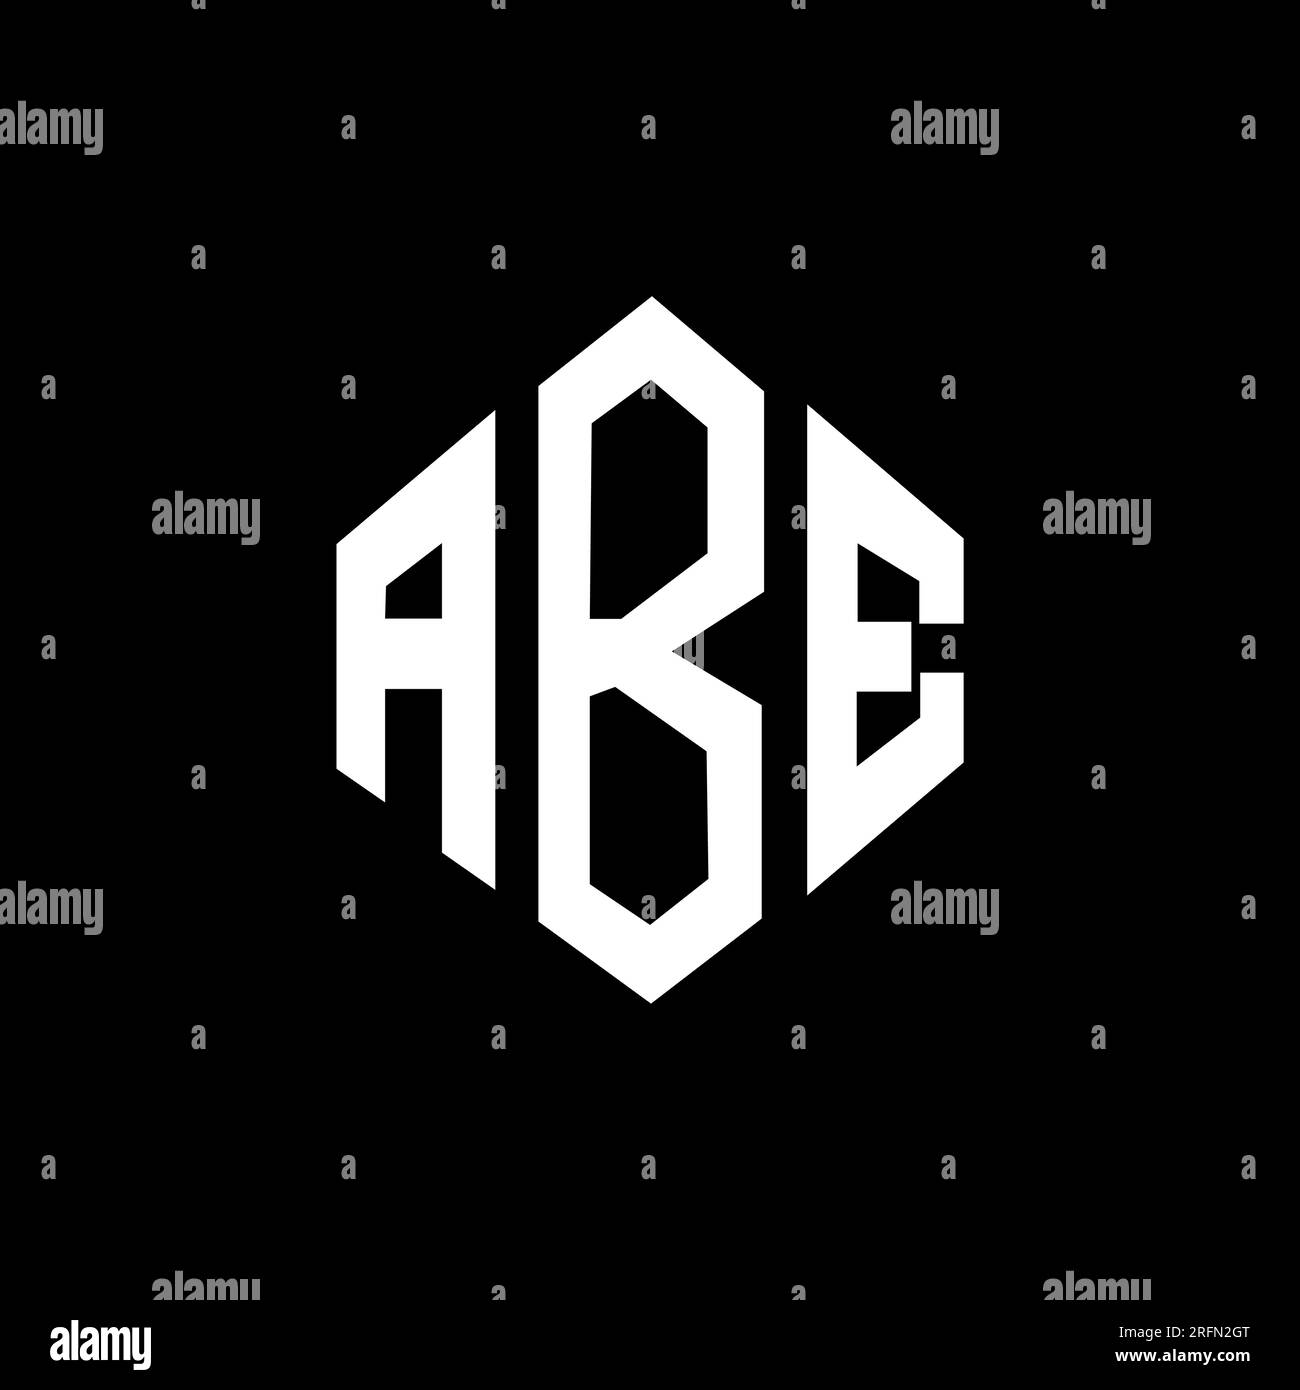 ABE letter logo design with polygon shape. ABE polygon and cube shape logo design. ABE hexagon vector logo template white and black colors. ABE monogr Stock Vector